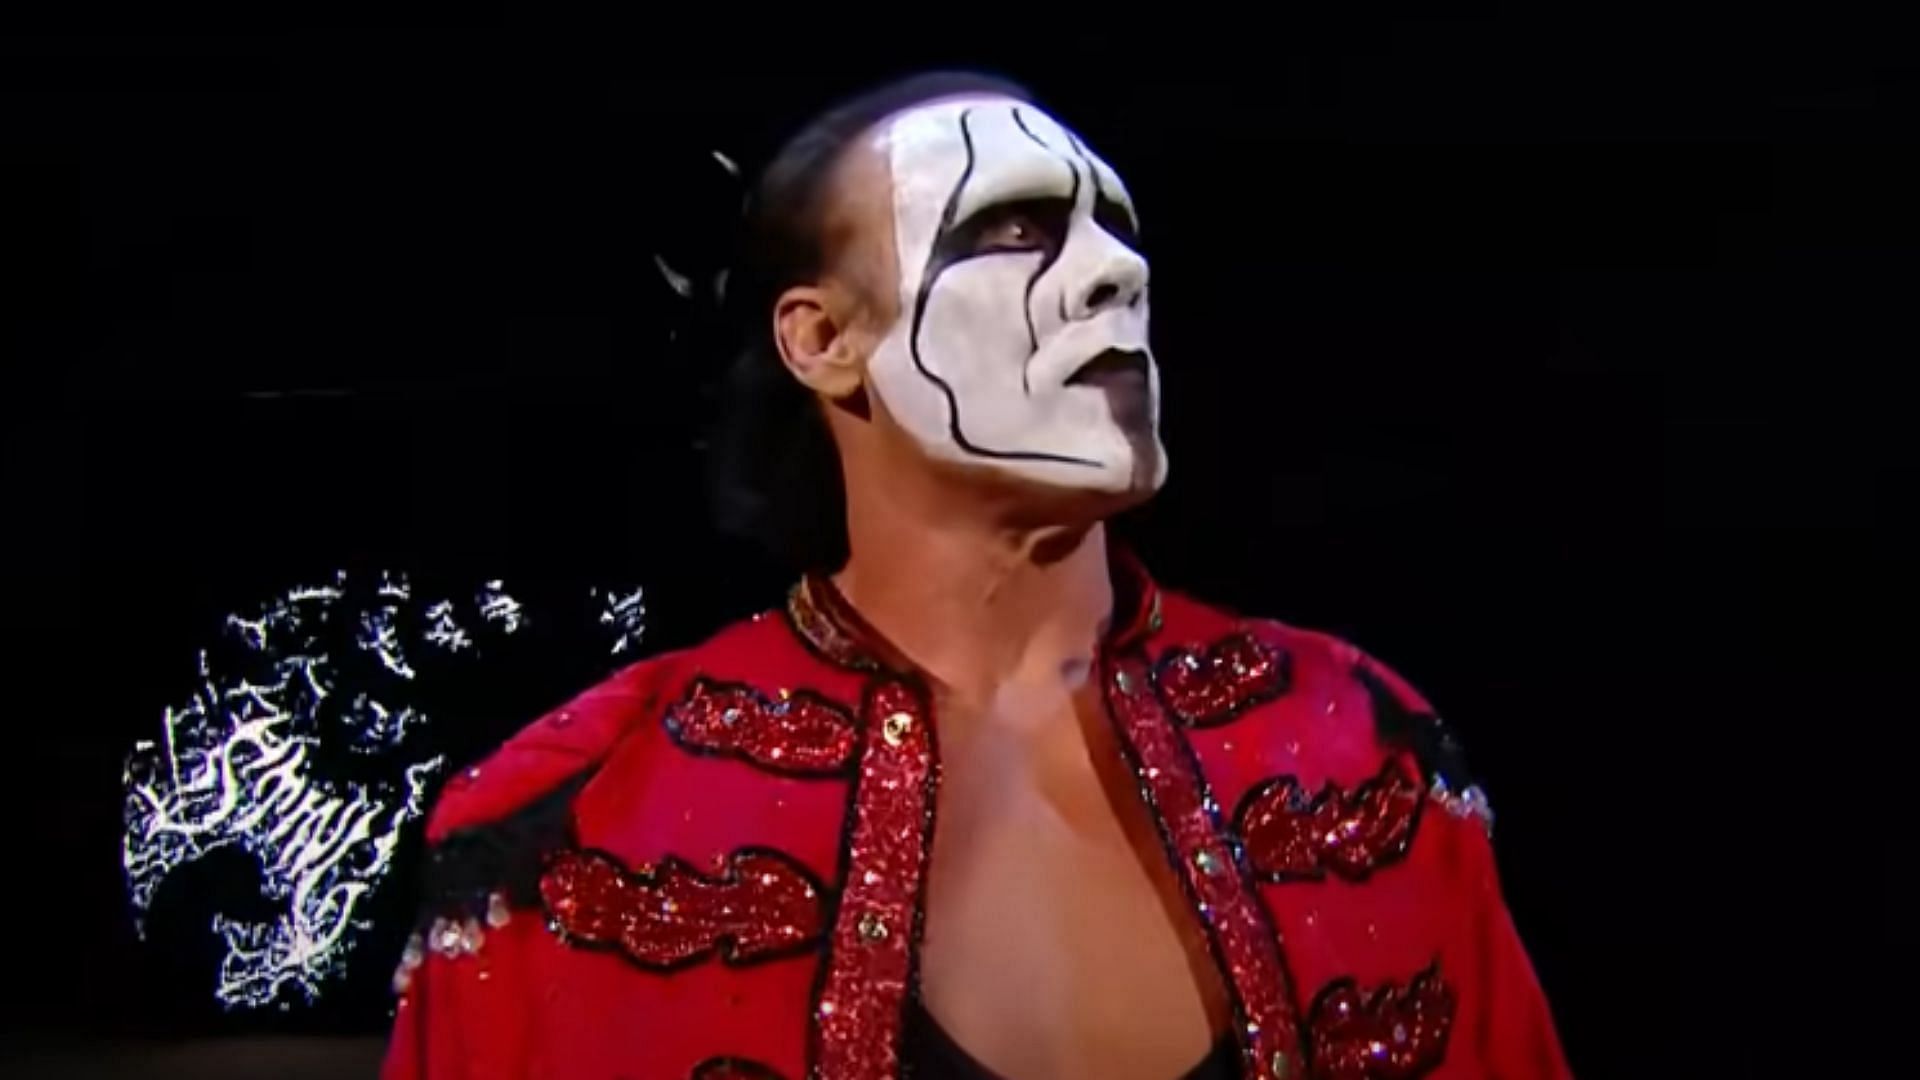 WWE Hall of Famer and current AEW star Sting